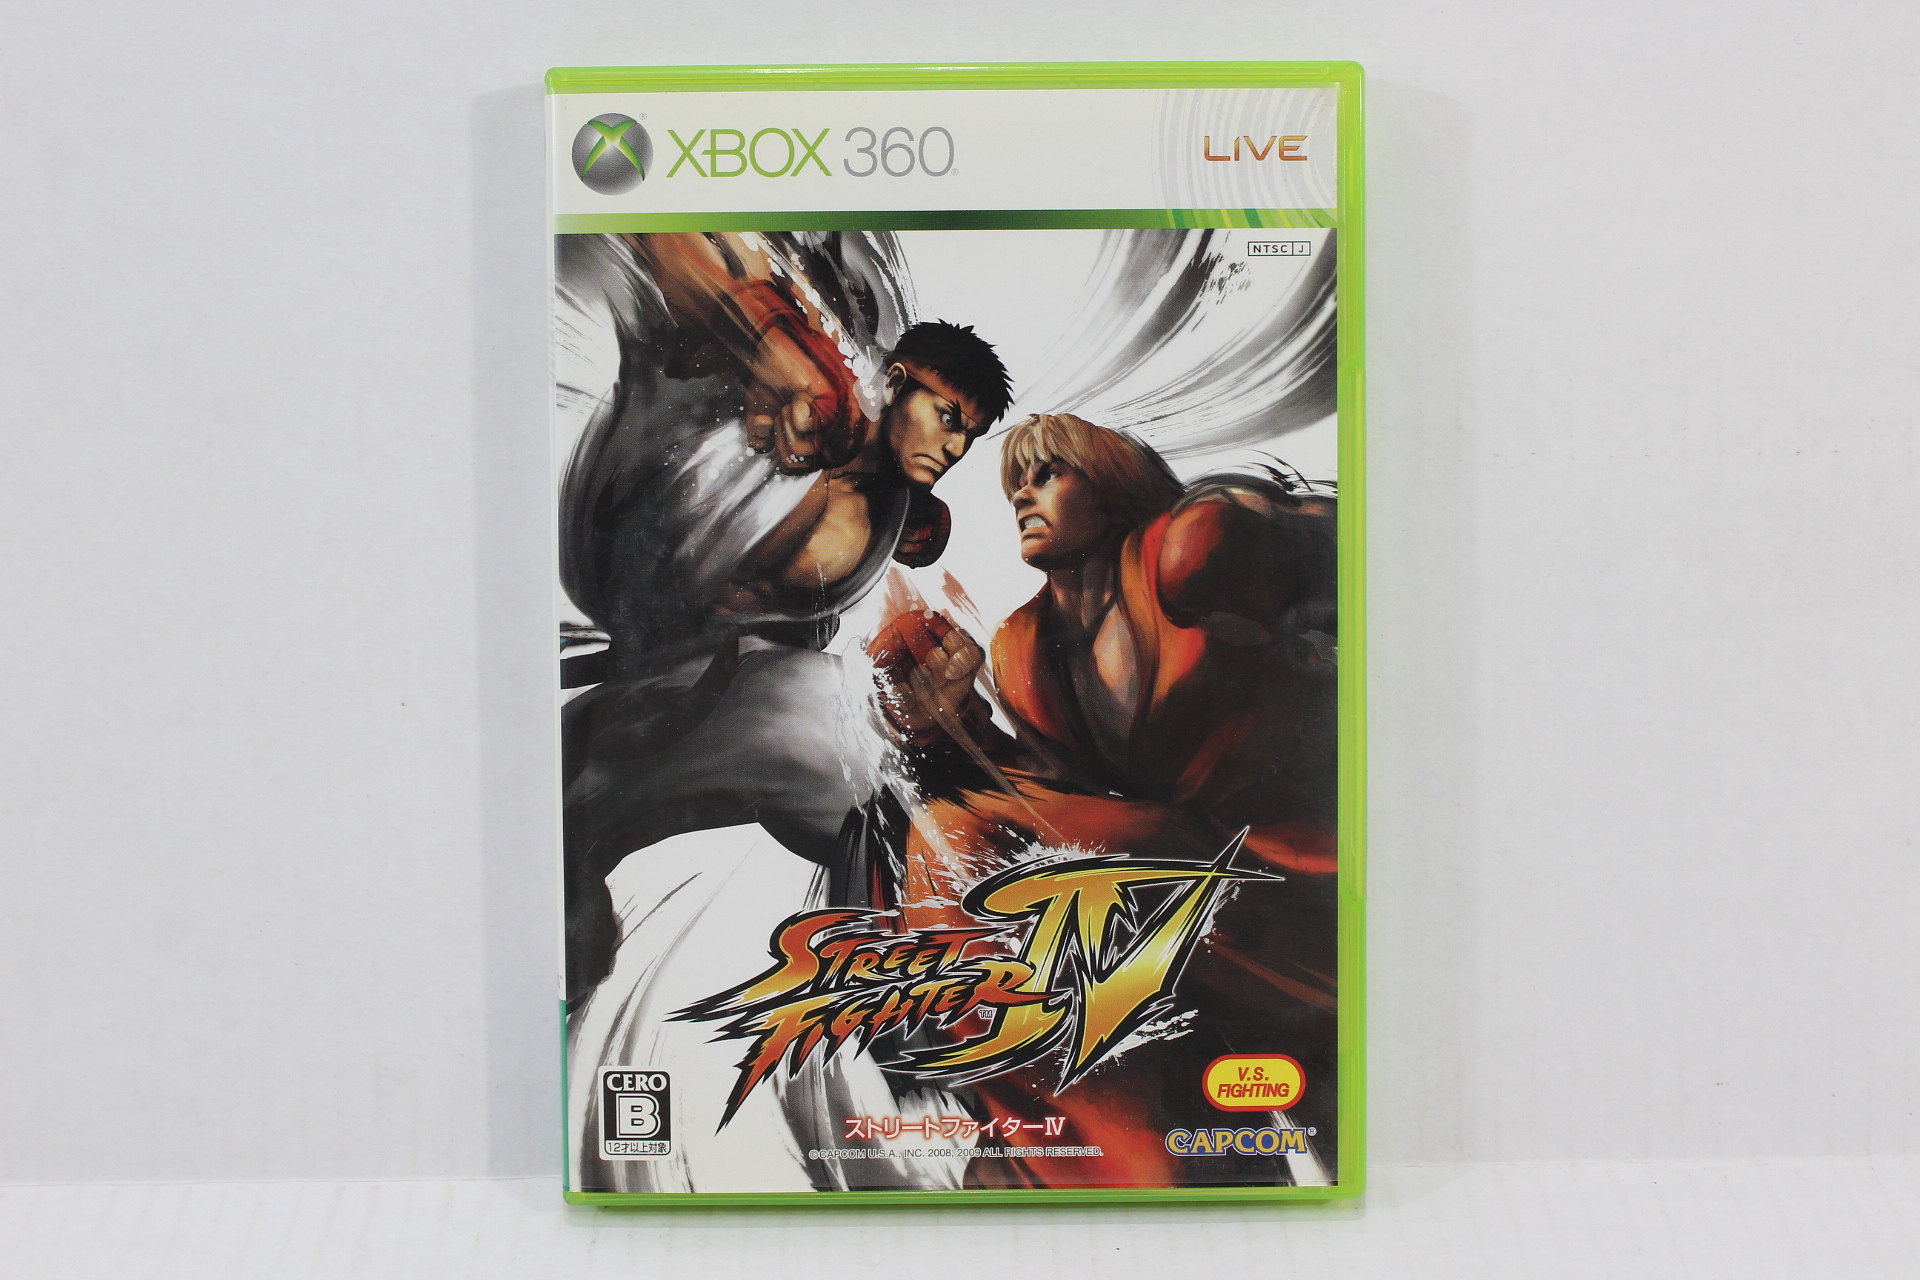 Ultra Street Fighter IV (Japanese & English) for Xbox360